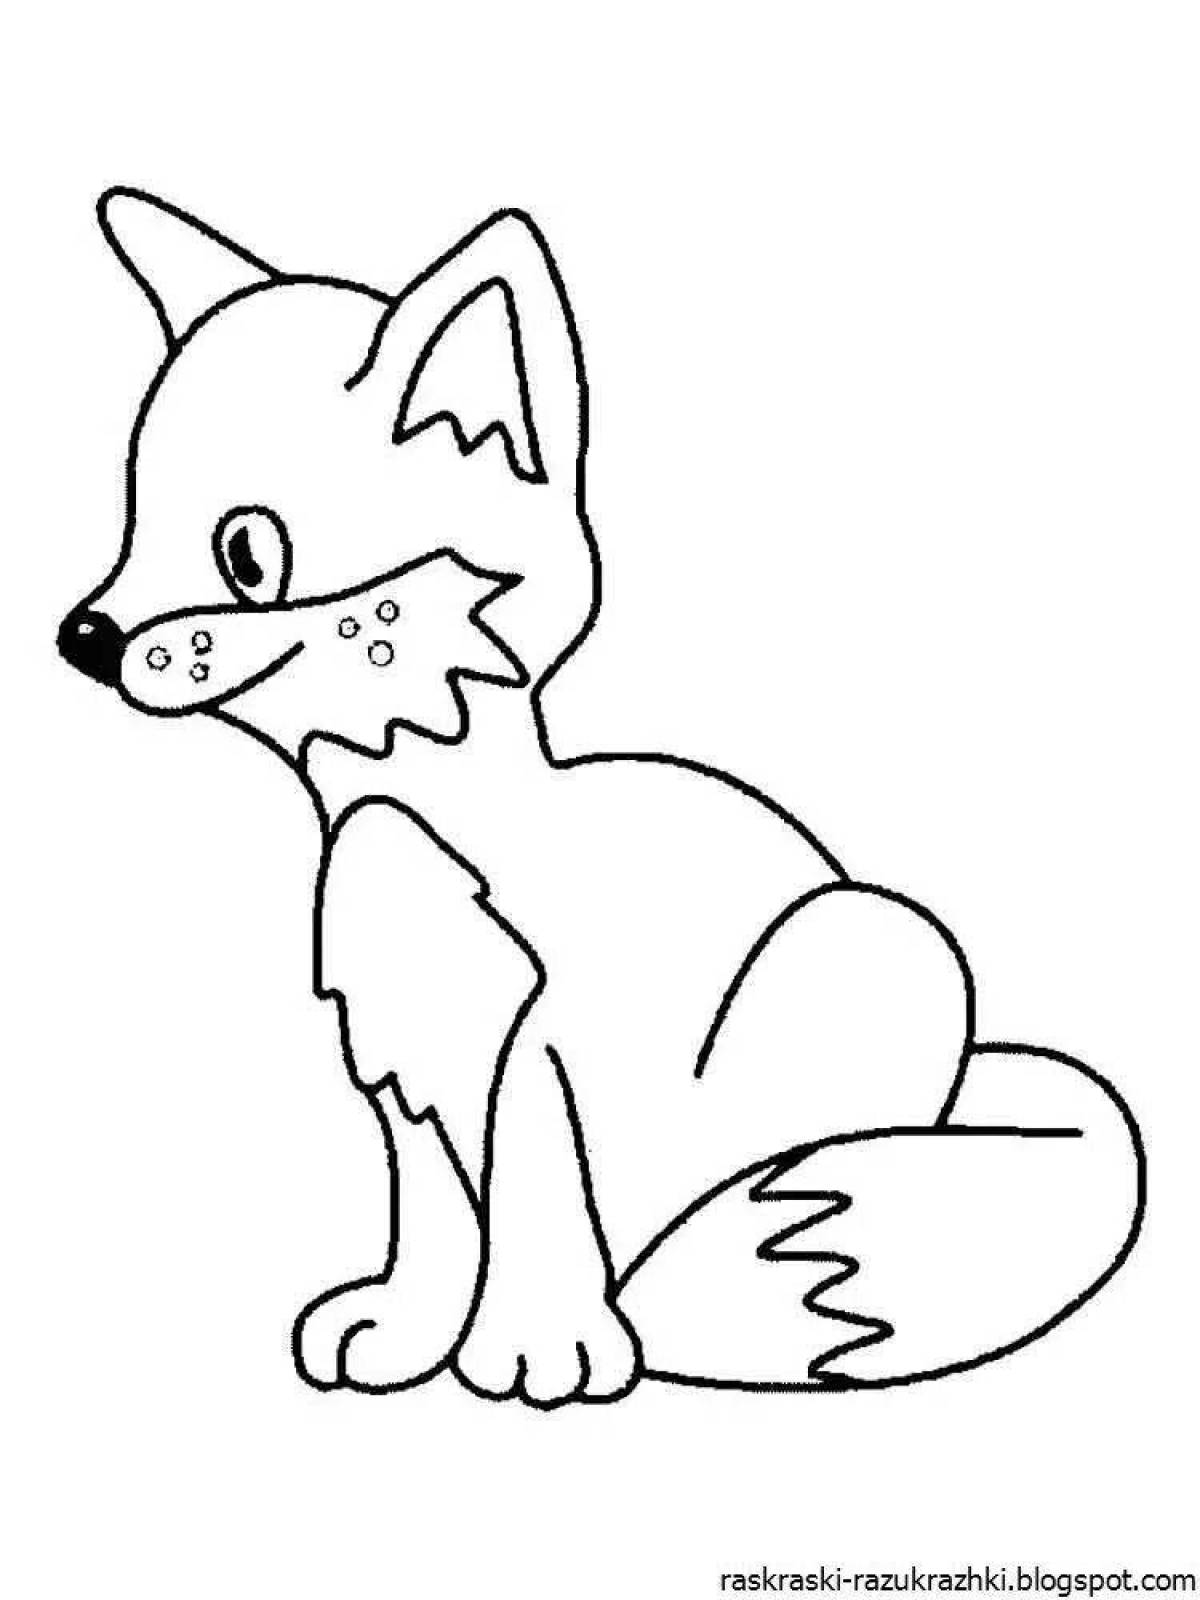 Witty fox coloring book for kids